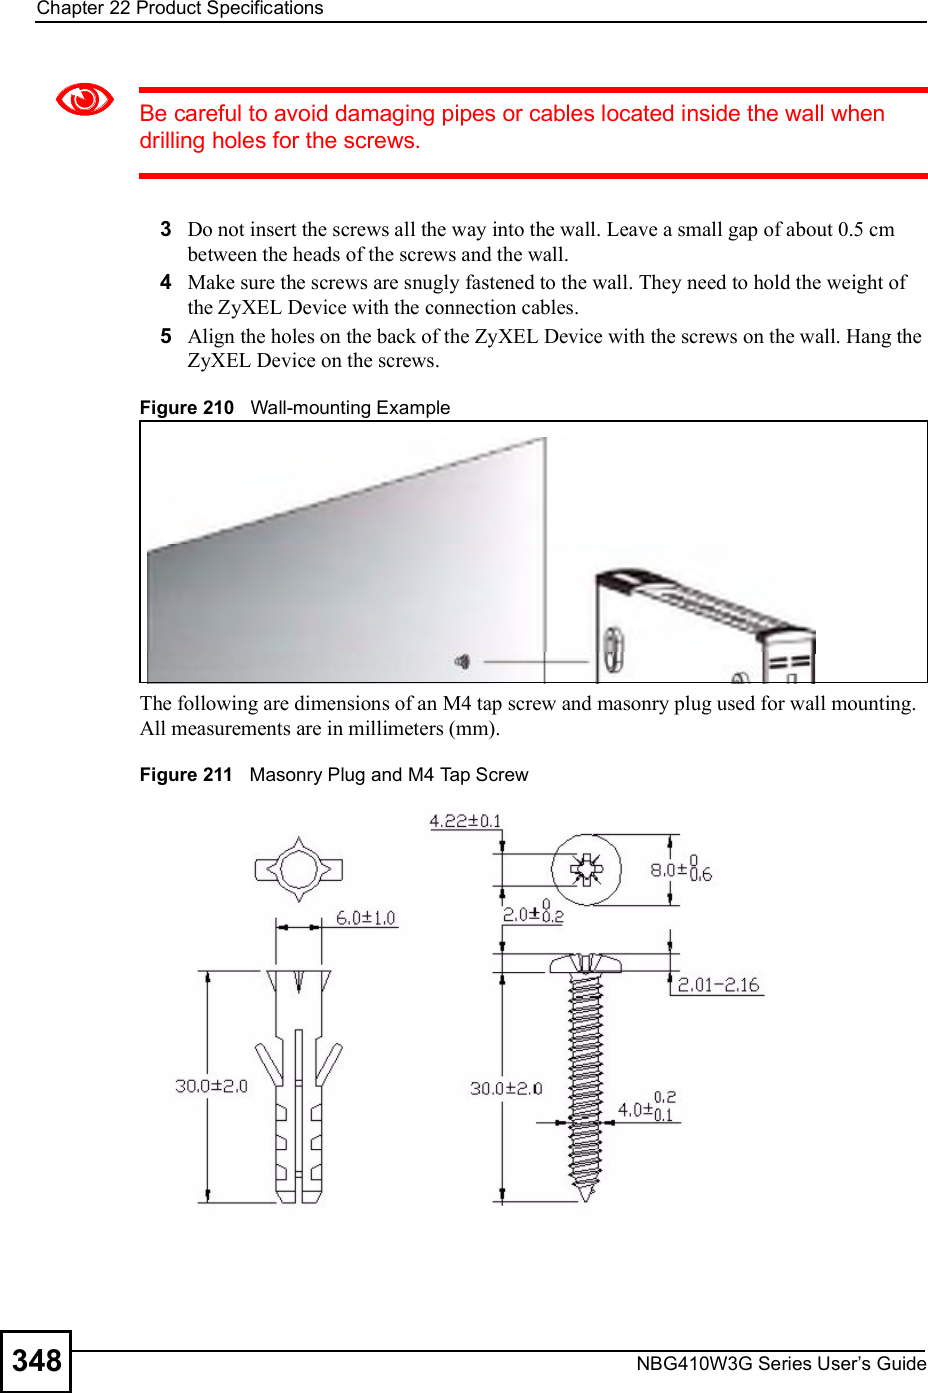 Chapter 22Product SpecificationsNBG410W3G Series User s Guide348Be careful to avoid damaging pipes or cables located inside the wall when drilling holes for the screws.3Do not insert the screws all the way into the wall. Leave a small gap of about 0.5 cm between the heads of the screws and the wall. 4Make sure the screws are snugly fastened to the wall. They need to hold the weight of the ZyXEL Device with the connection cables. 5Align the holes on the back of the ZyXEL Device with the screws on the wall. Hang the ZyXEL Device on the screws.Figure 210   Wall-mounting ExampleThe following are dimensions of an M4 tap screw and masonry plug used for wall mounting. All measurements are in millimeters (mm). Figure 211   Masonry Plug and M4 Tap Screw